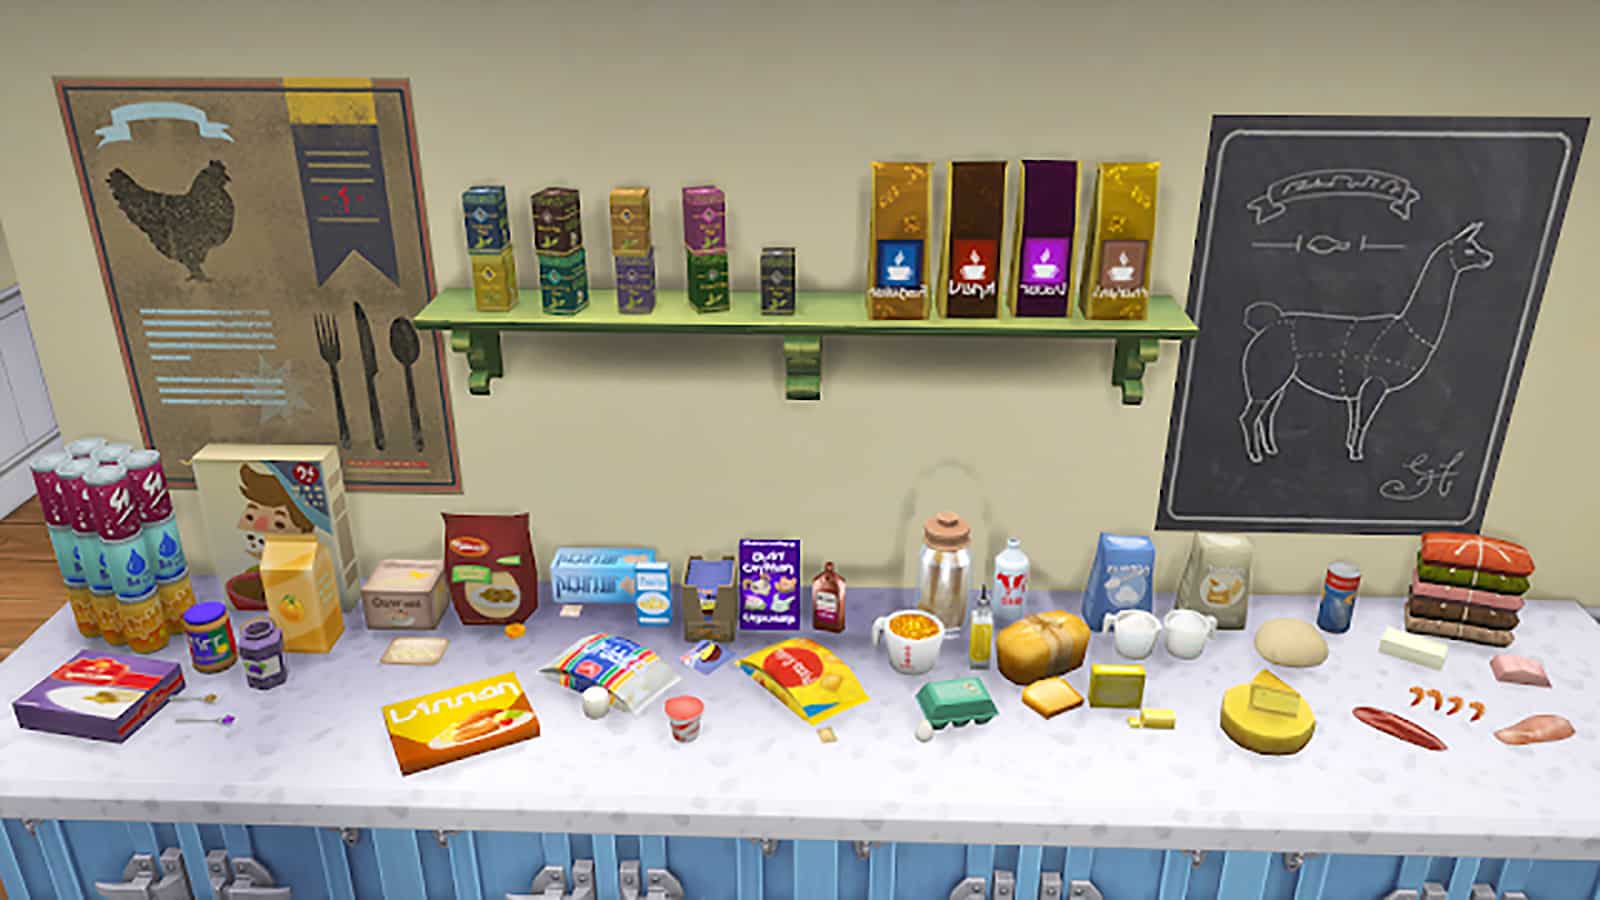 Ingredients in Srsly's Complete Cooking Overhaul mod in The Sims 4